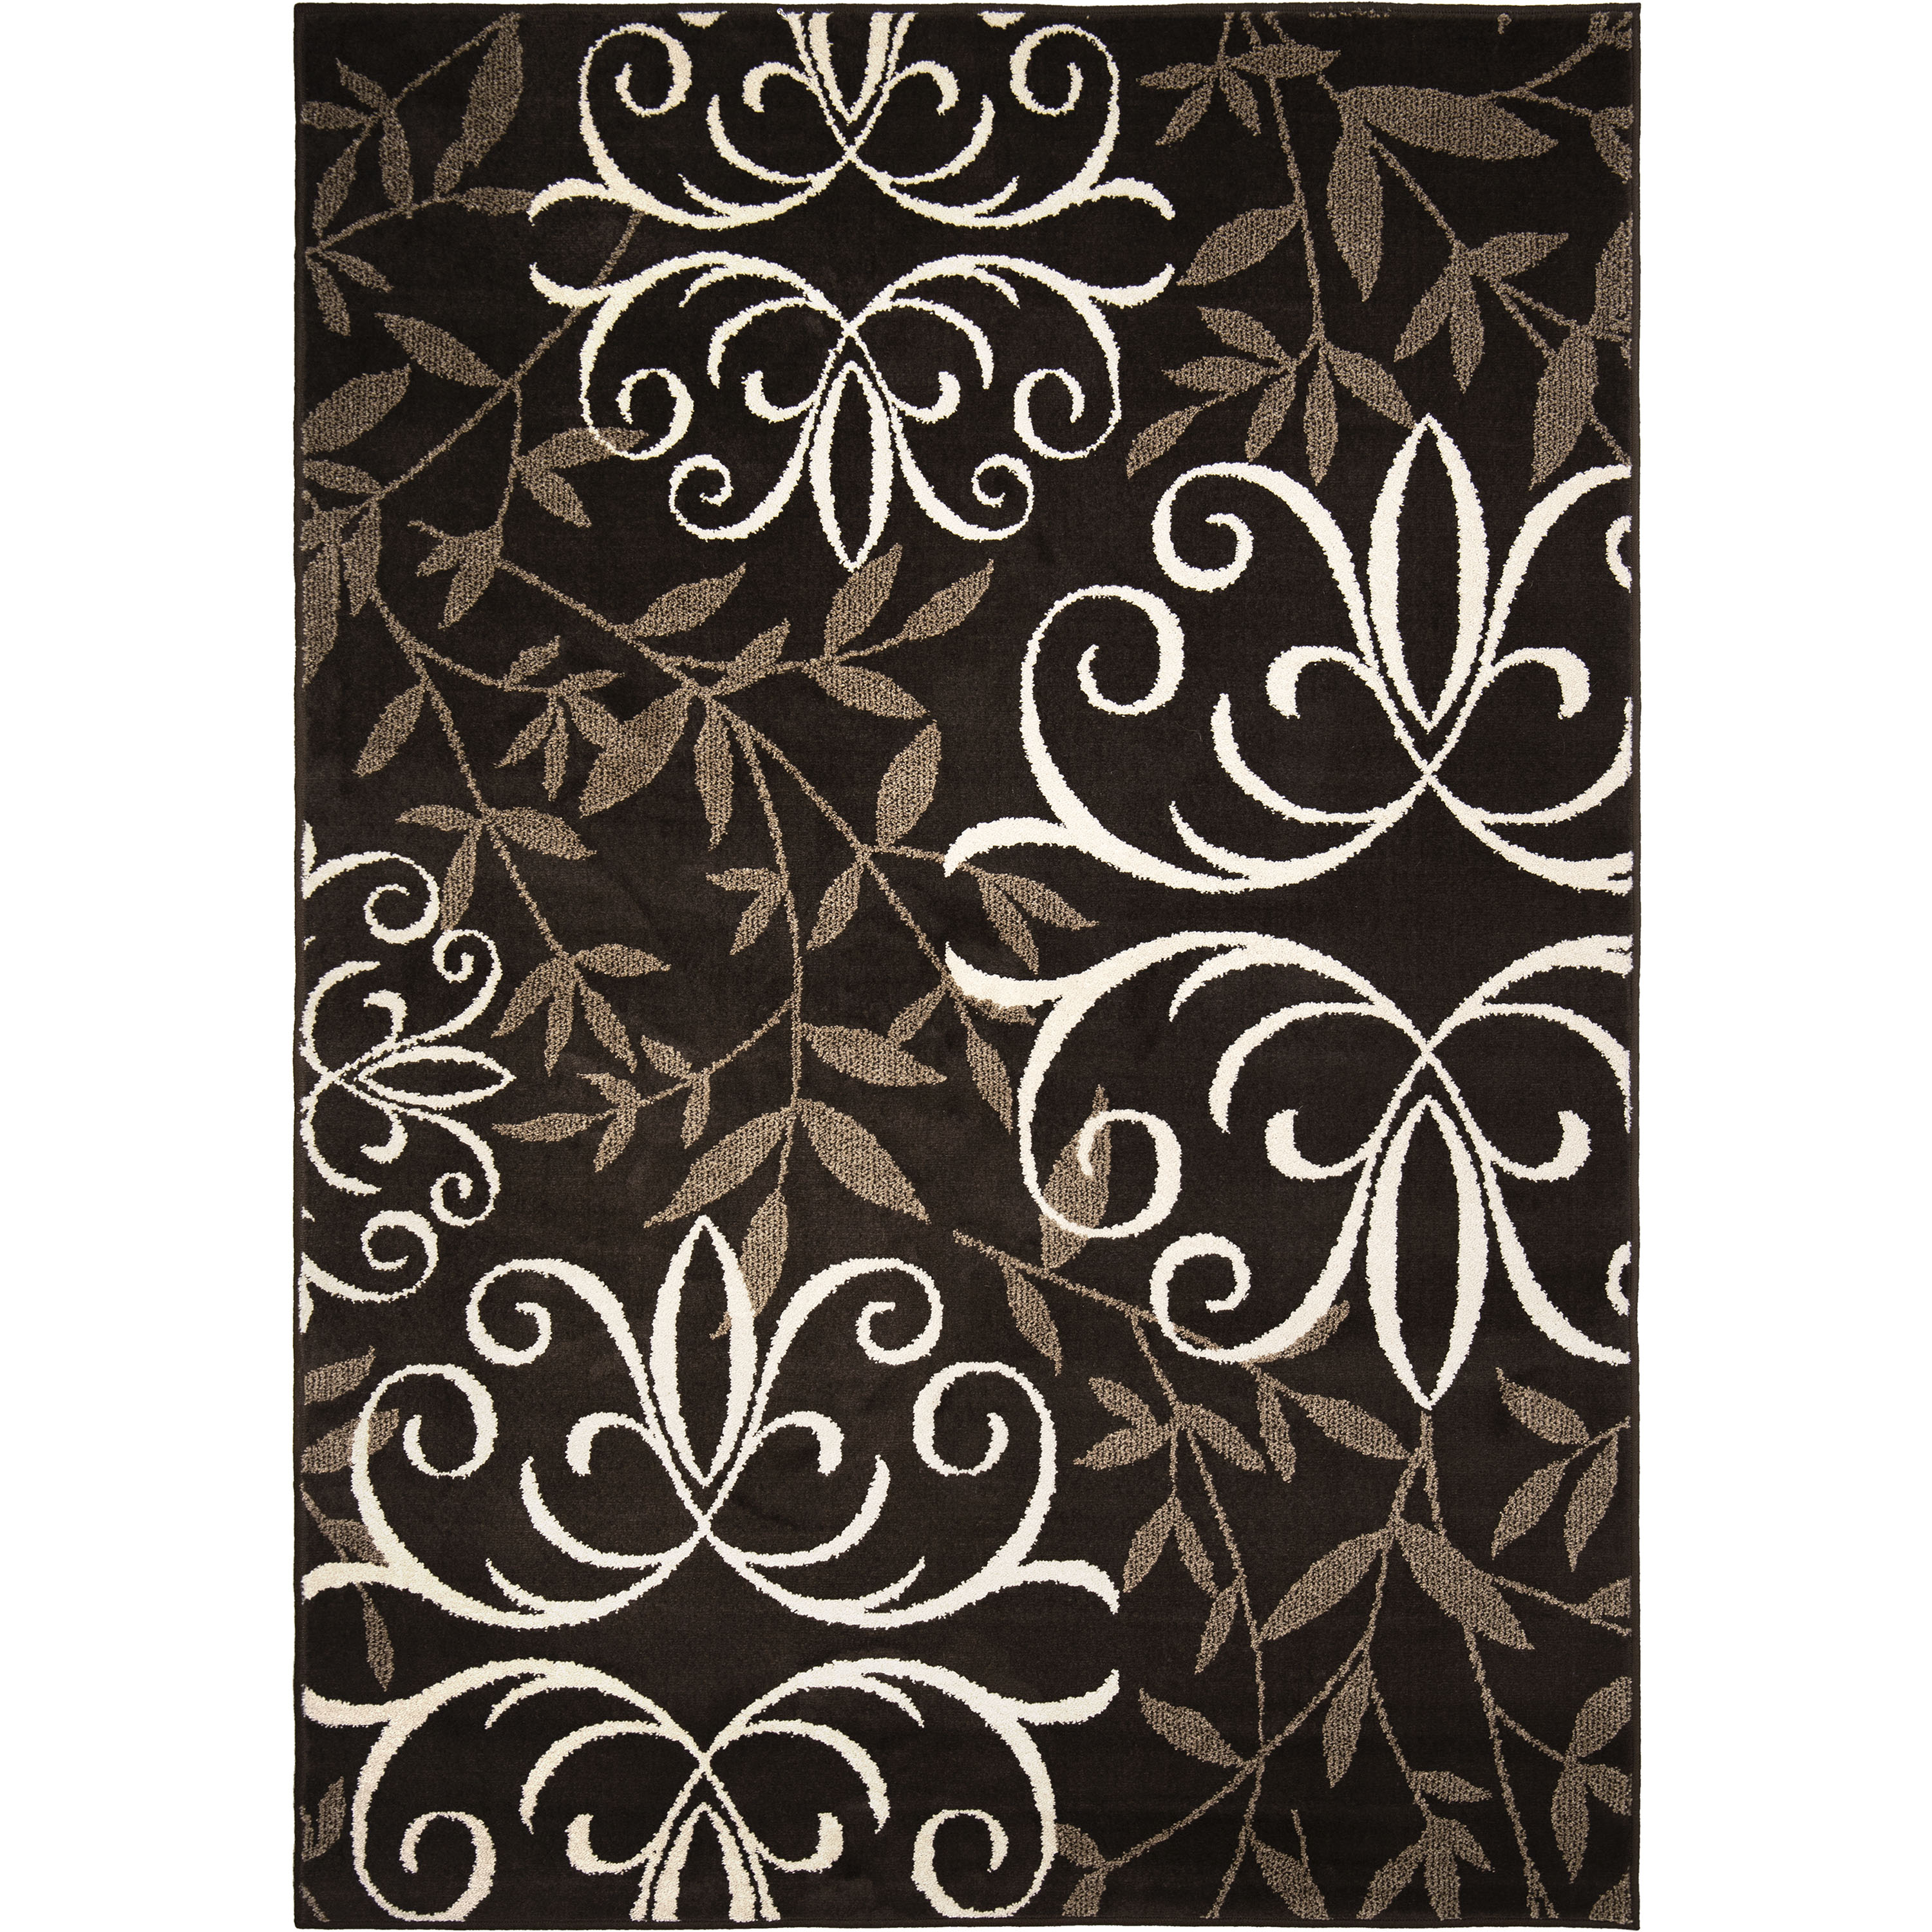 Better Homes & Gardens Iron Fleur Area Rug, Brown, 7'10" x 10'10" - image 5 of 10